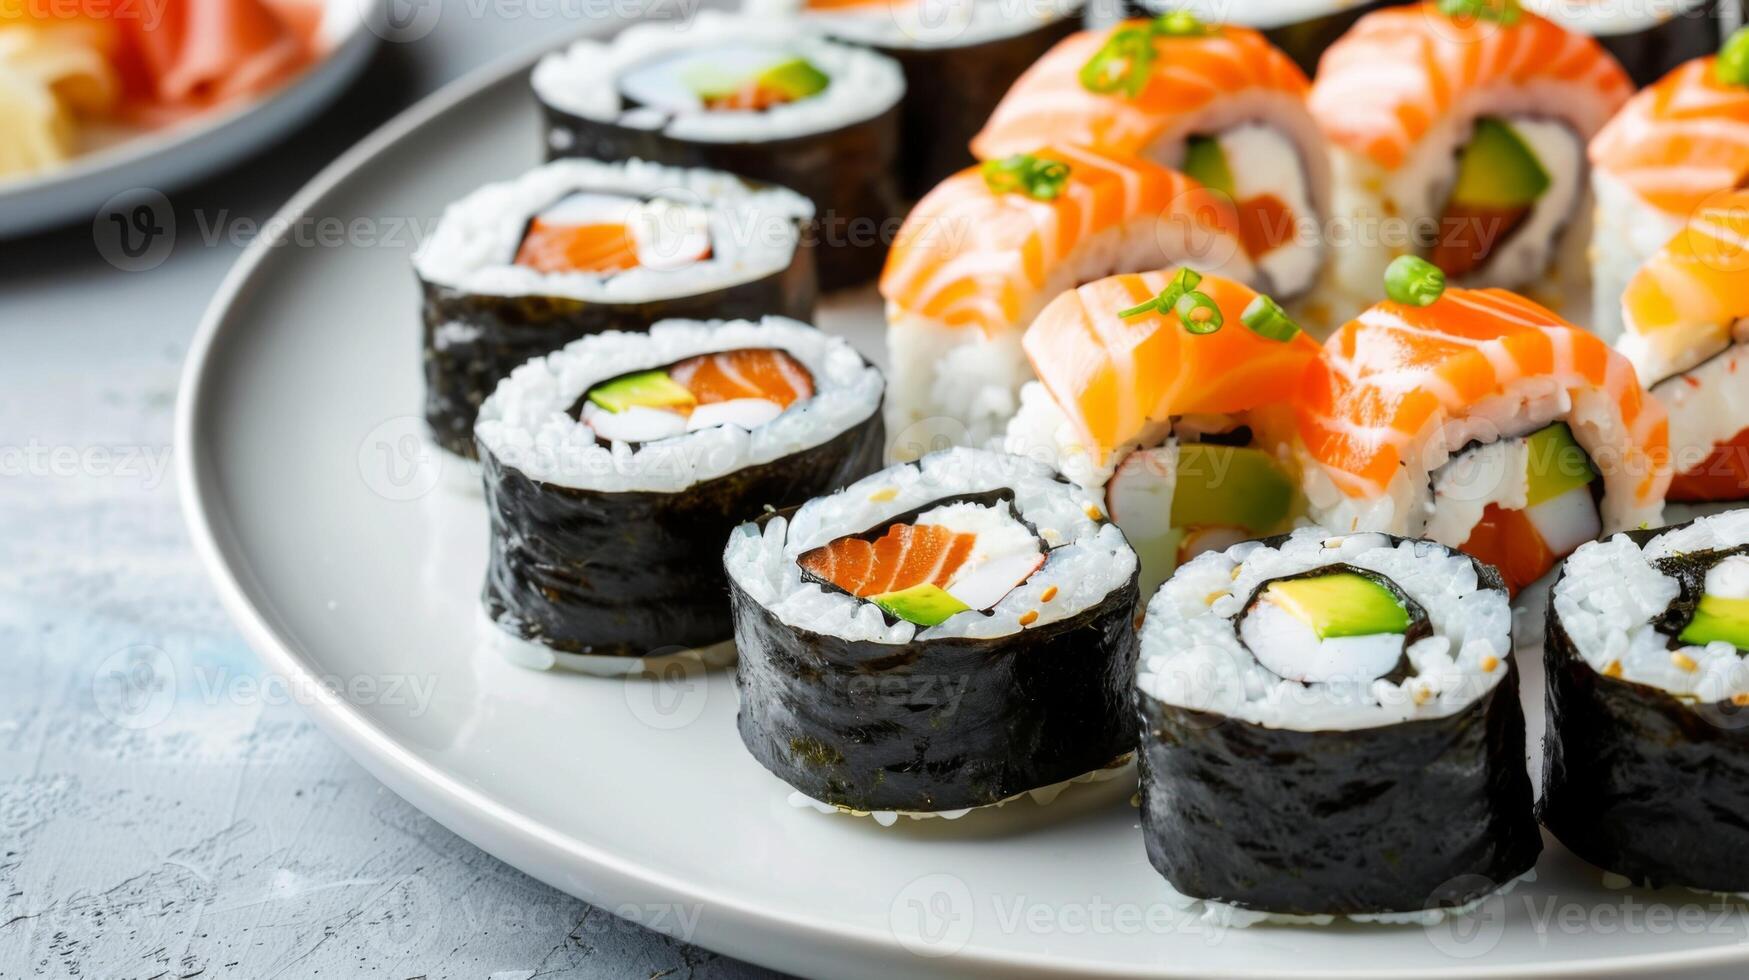 Delectable sushi platter with salmon, avocado, rice, nori, roll, and Japanese elements photo